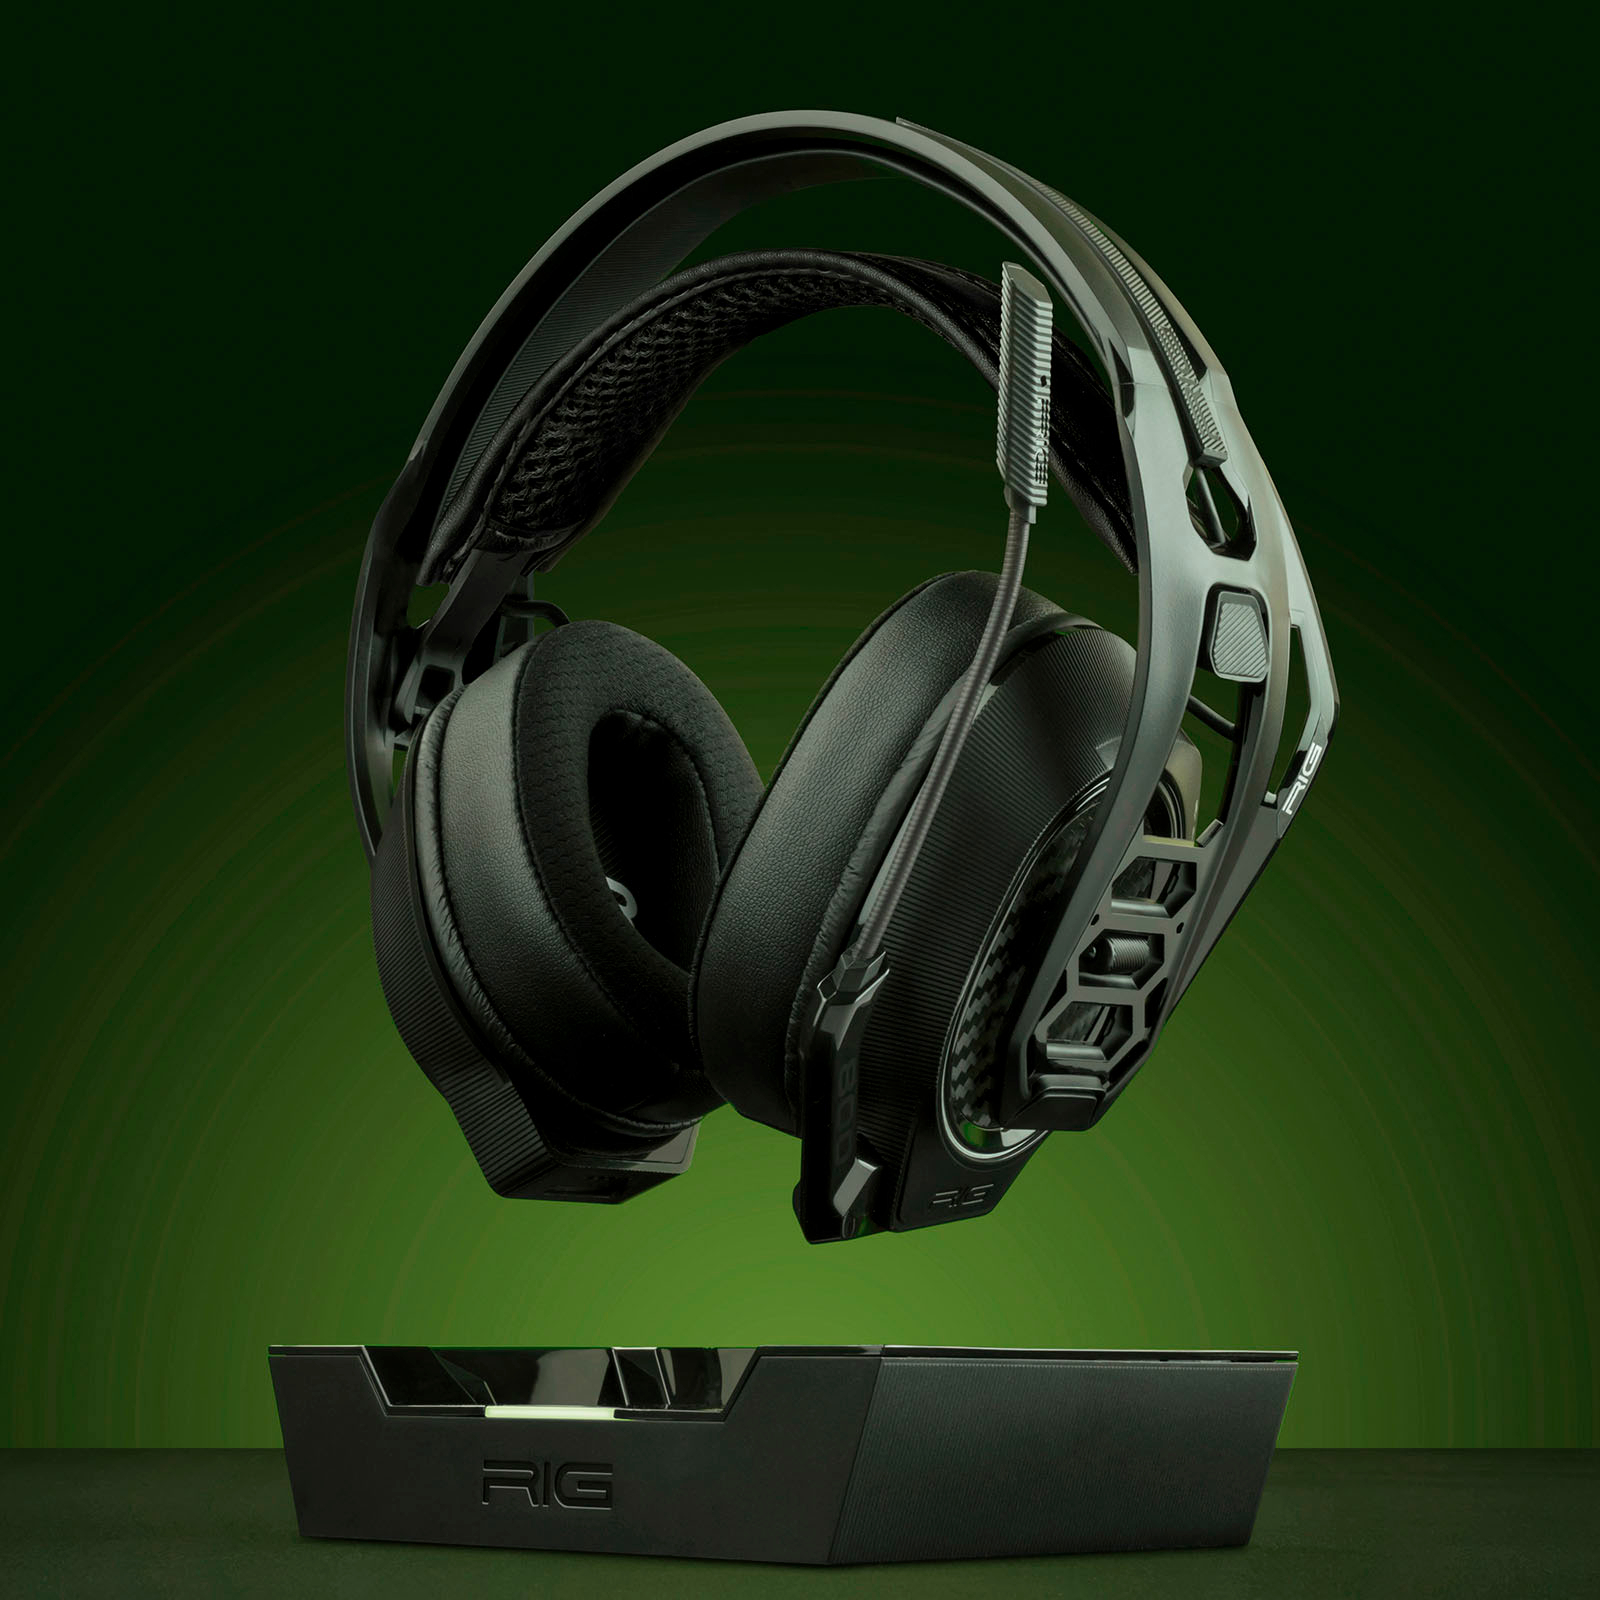 RIG 800 Best for - Gaming Headset Xbox Buy HX 10-1172-01 Pro Wireless Black